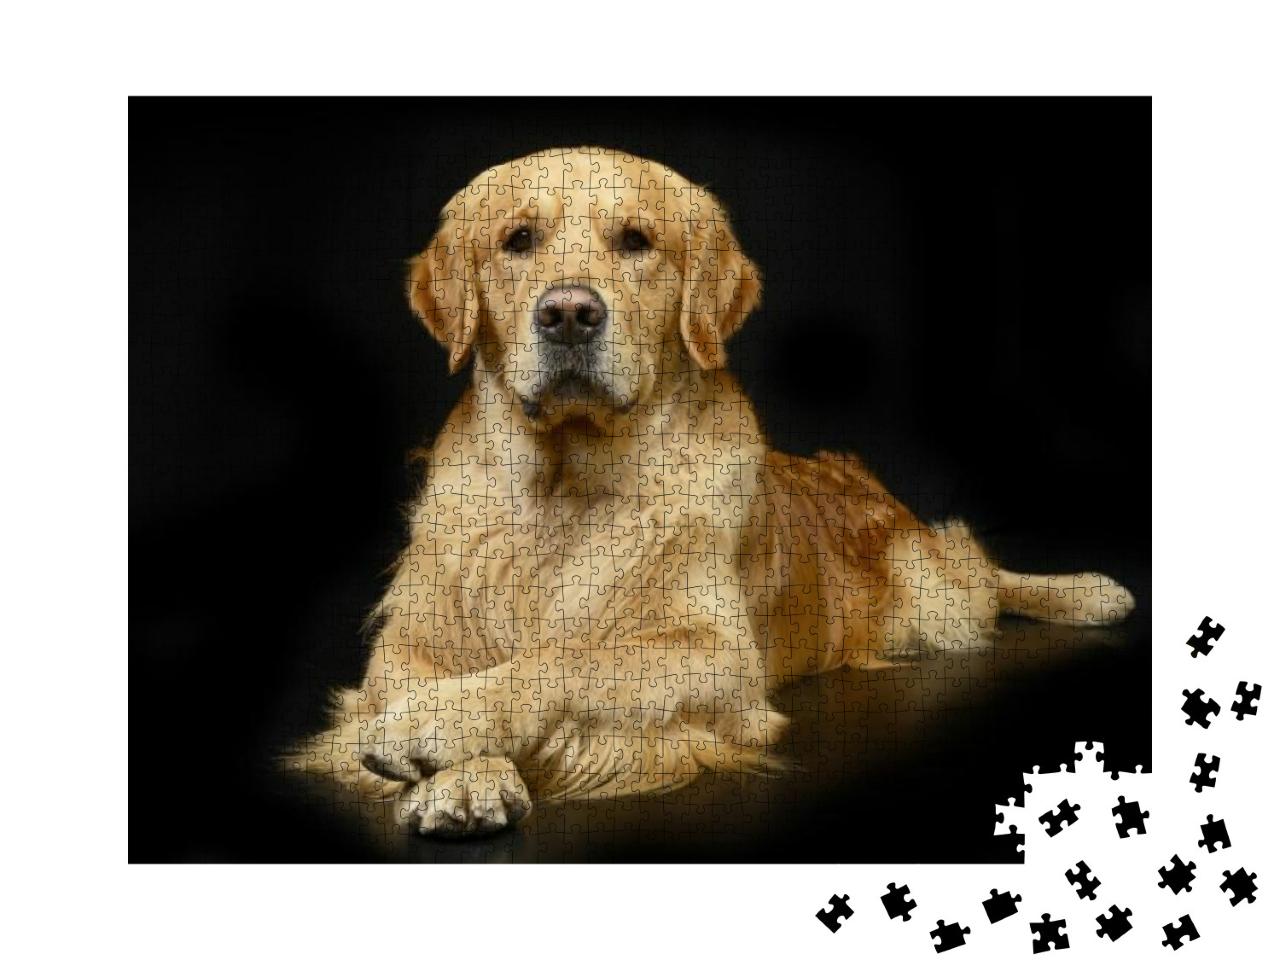 Studio Shot of an Adorable Golden Retriever Lying on Blac... Jigsaw Puzzle with 1000 pieces